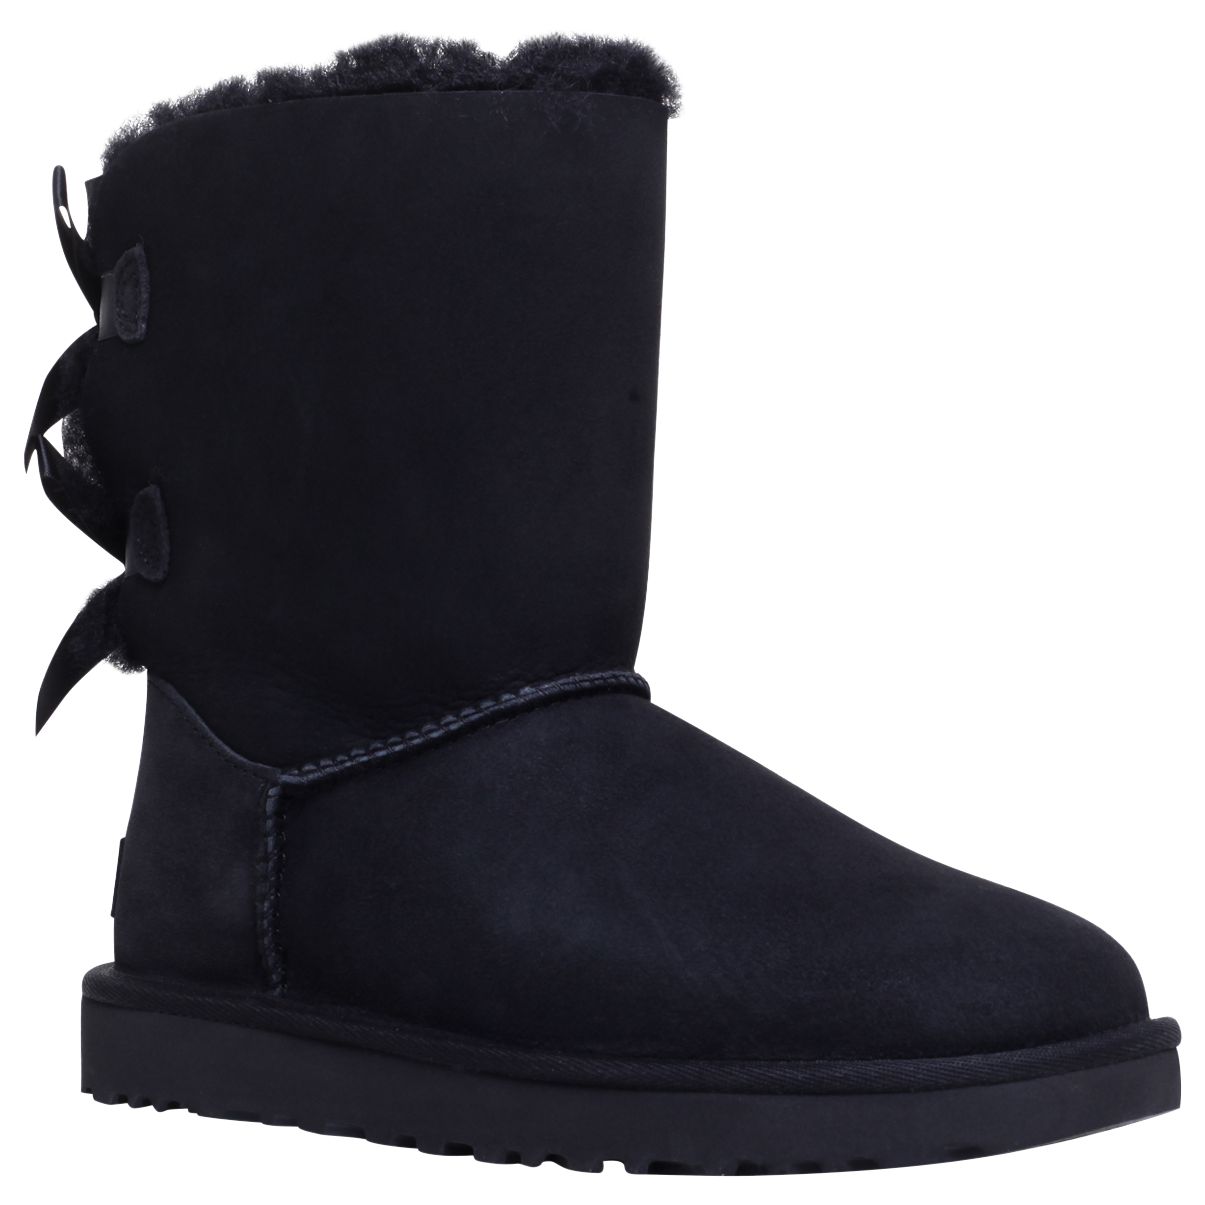 black ugg boots with ribbons